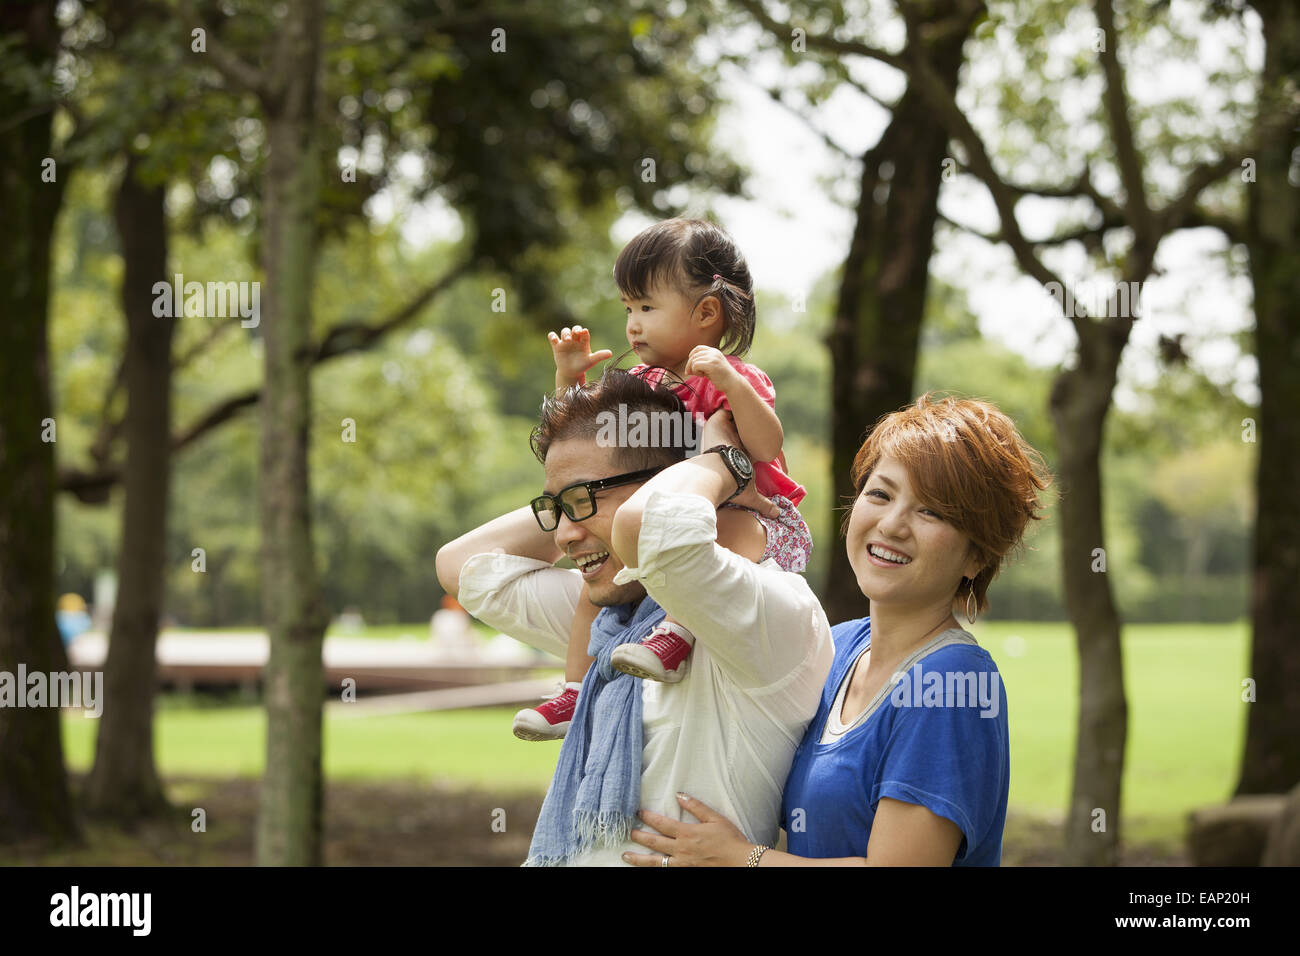 Family in a park. Two parents and a toddler. Stock Photo